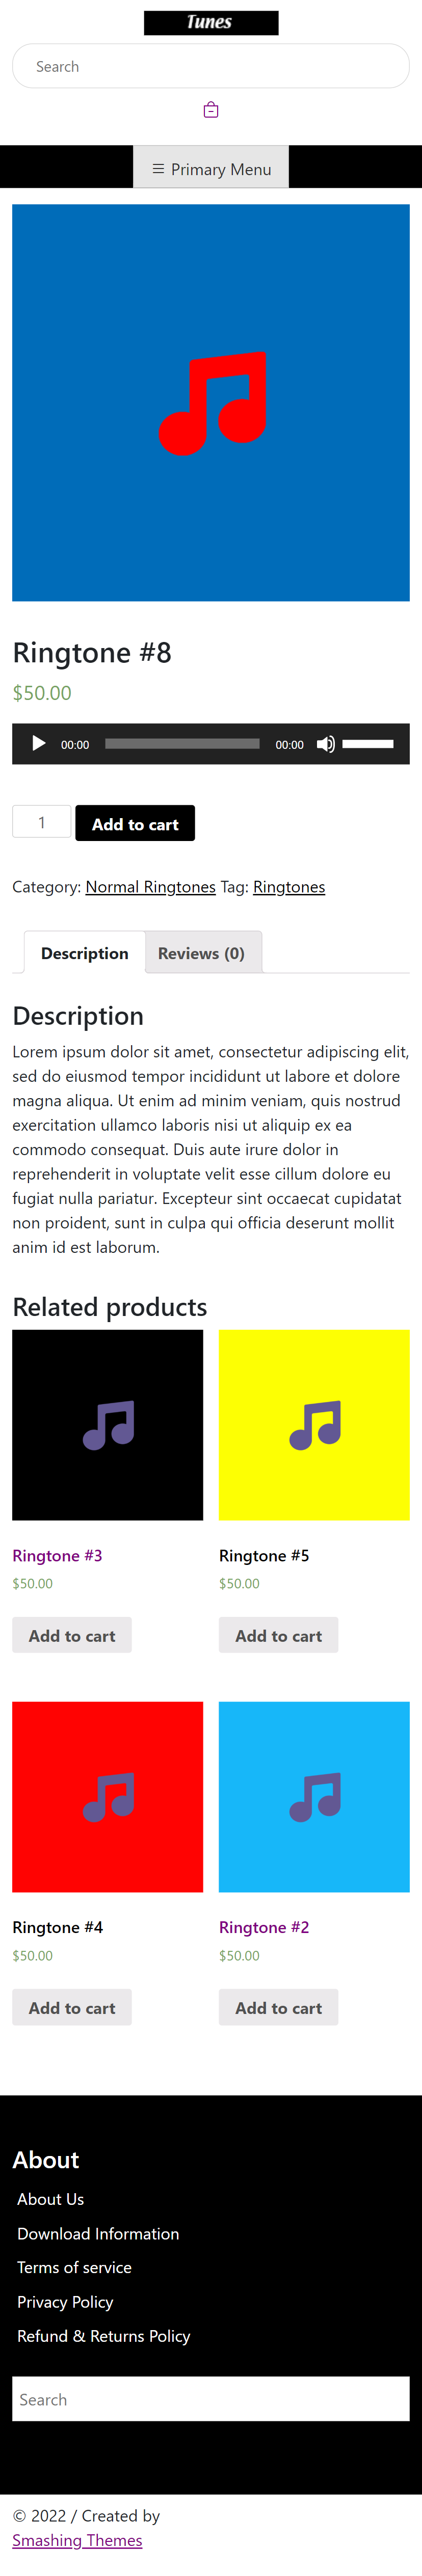 Tunes WordPress Theme for Audio Files- Product Page Screenshot for iPhone XR (414px_896px)